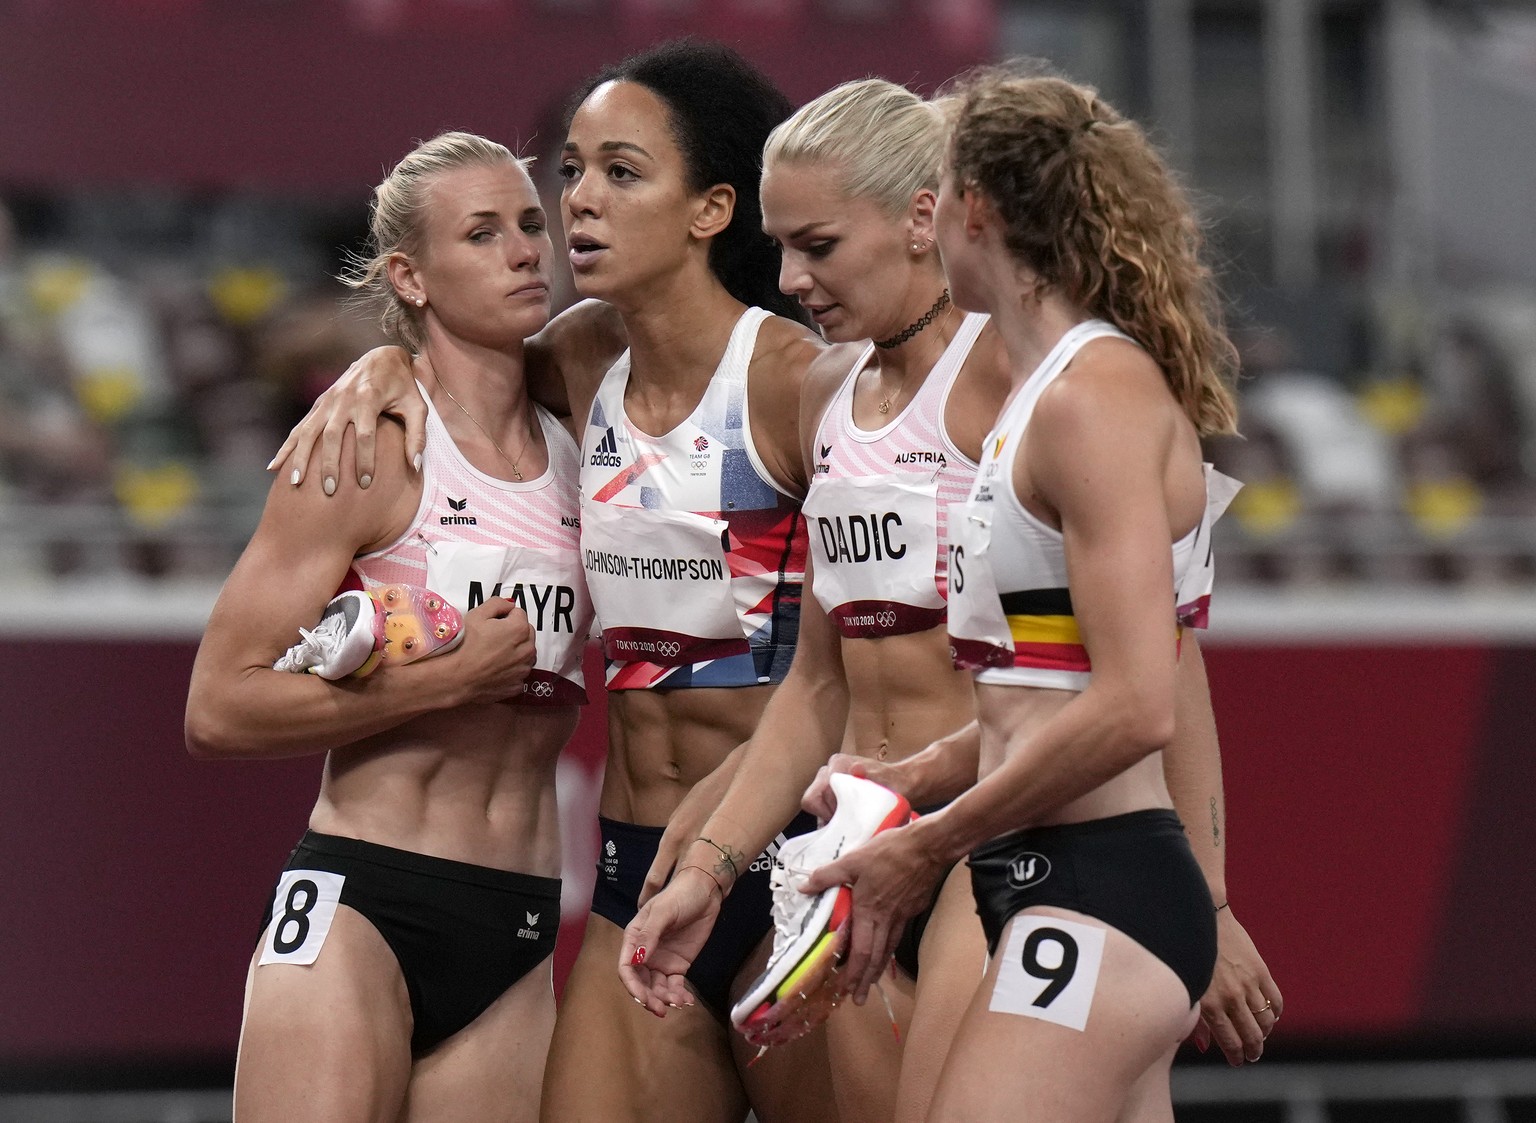 Katarina Johnson-Thompson, of Britain, second left, is consoled by other competitors after pulling up injured in the heptathlon 200-meters at the 2020 Summer Olympics, Wednesday, Aug. 4, 2021, in Toky ...